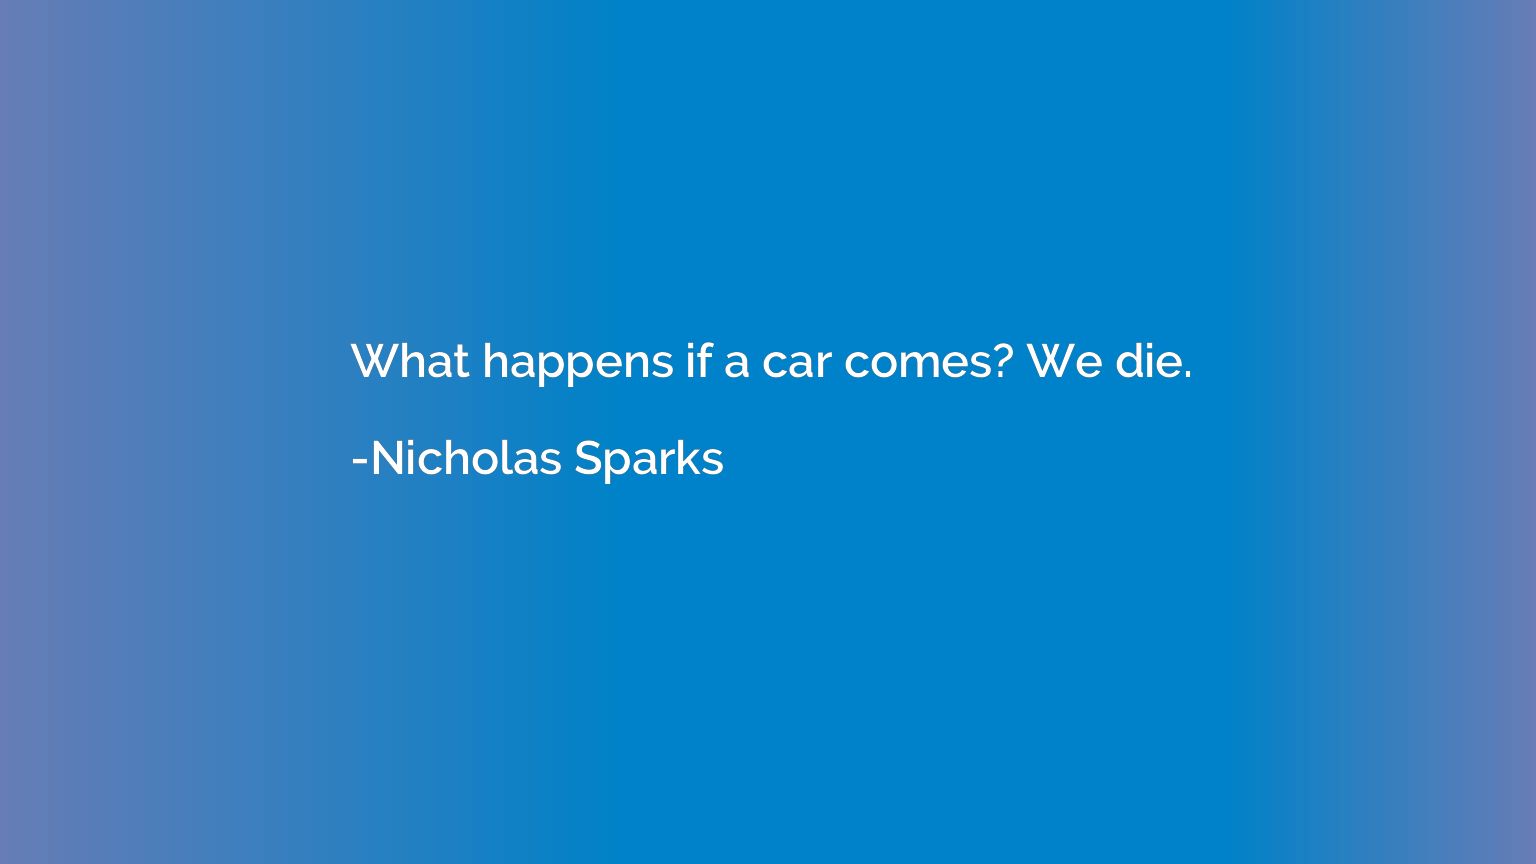 What happens if a car comes? We die.